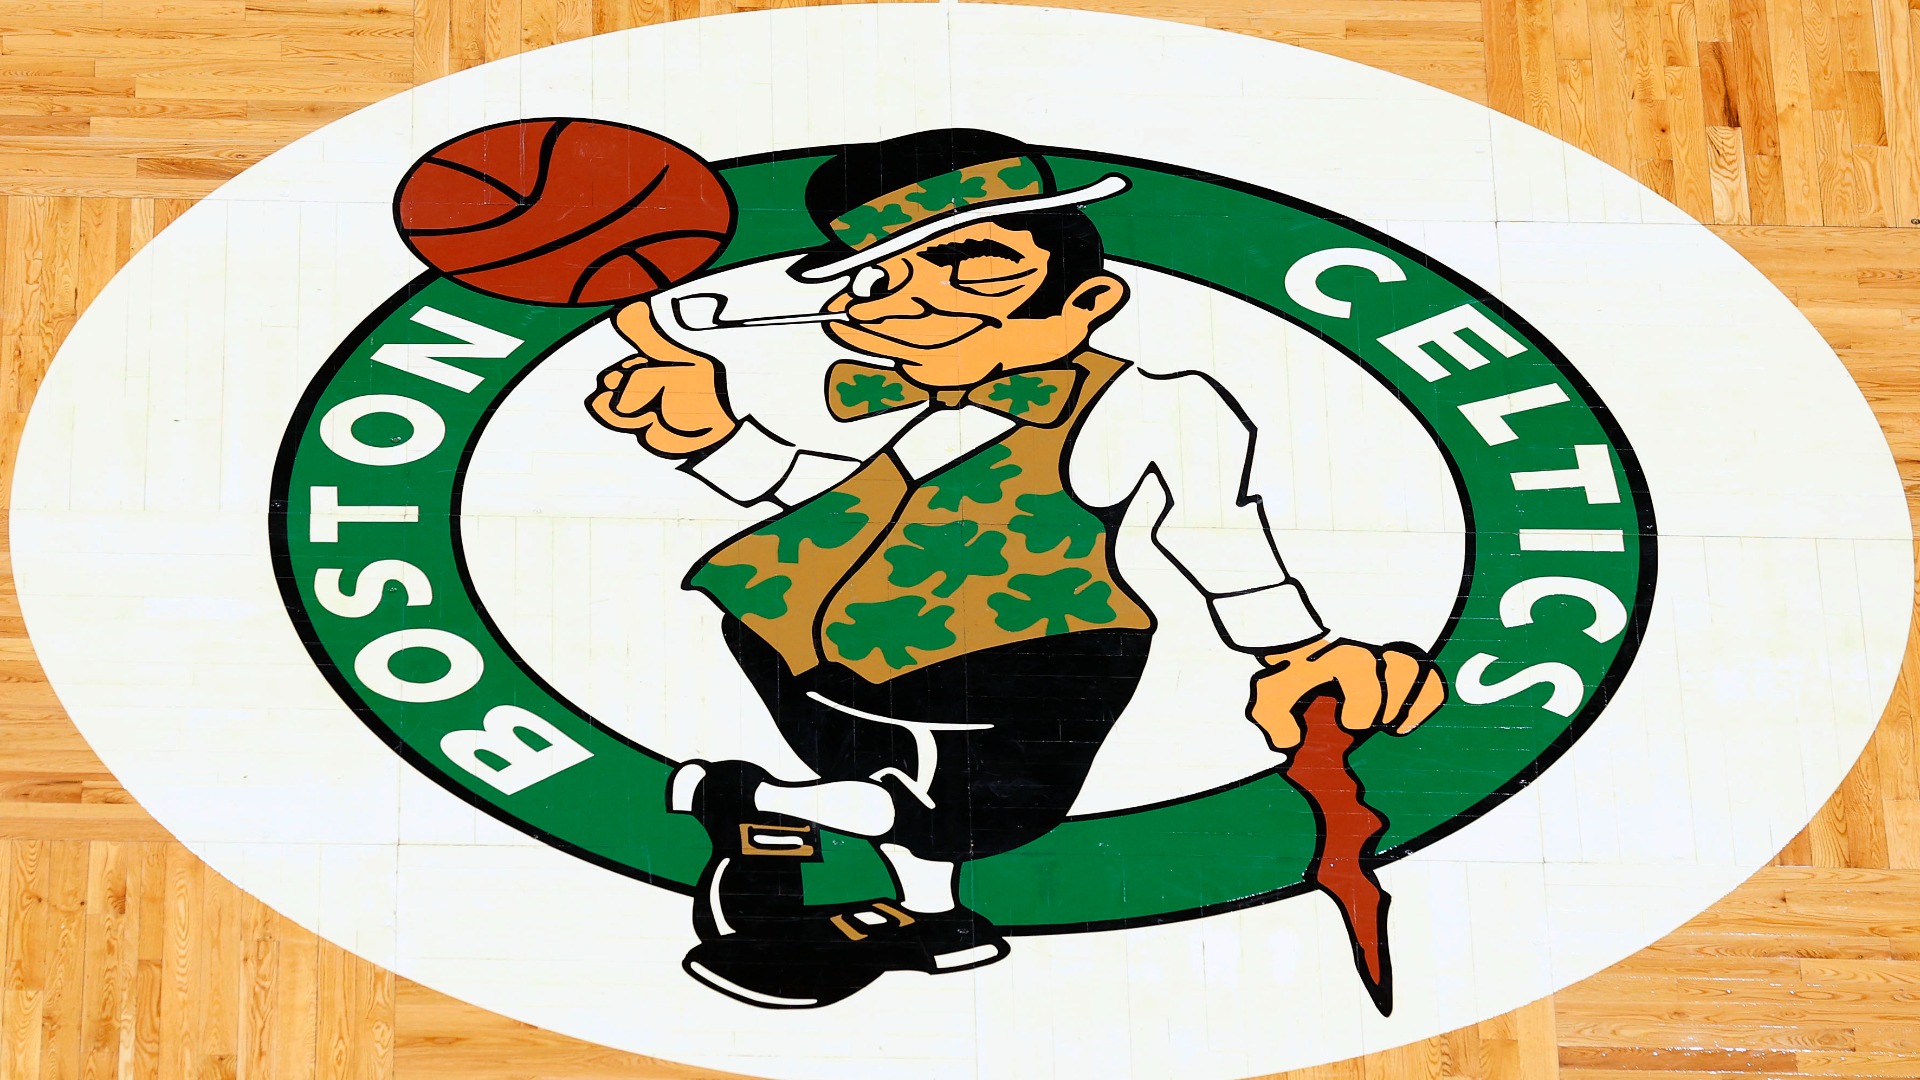 Celtics First To Be Featured In ‘The Vault’ New Hall Of Fame
Exhibit